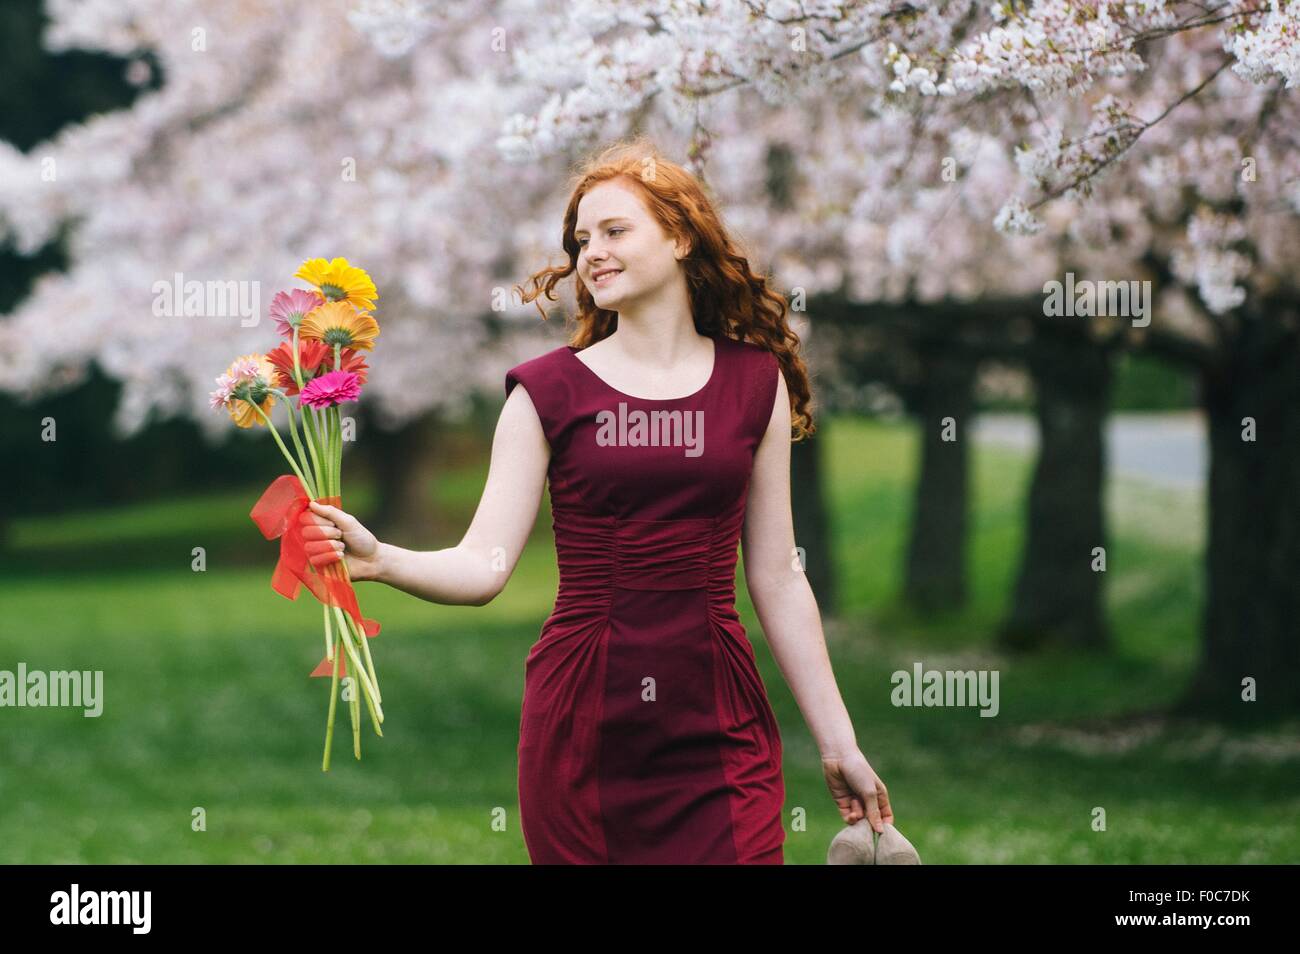 Young woman holding bunch of flowers in spring park Banque D'Images